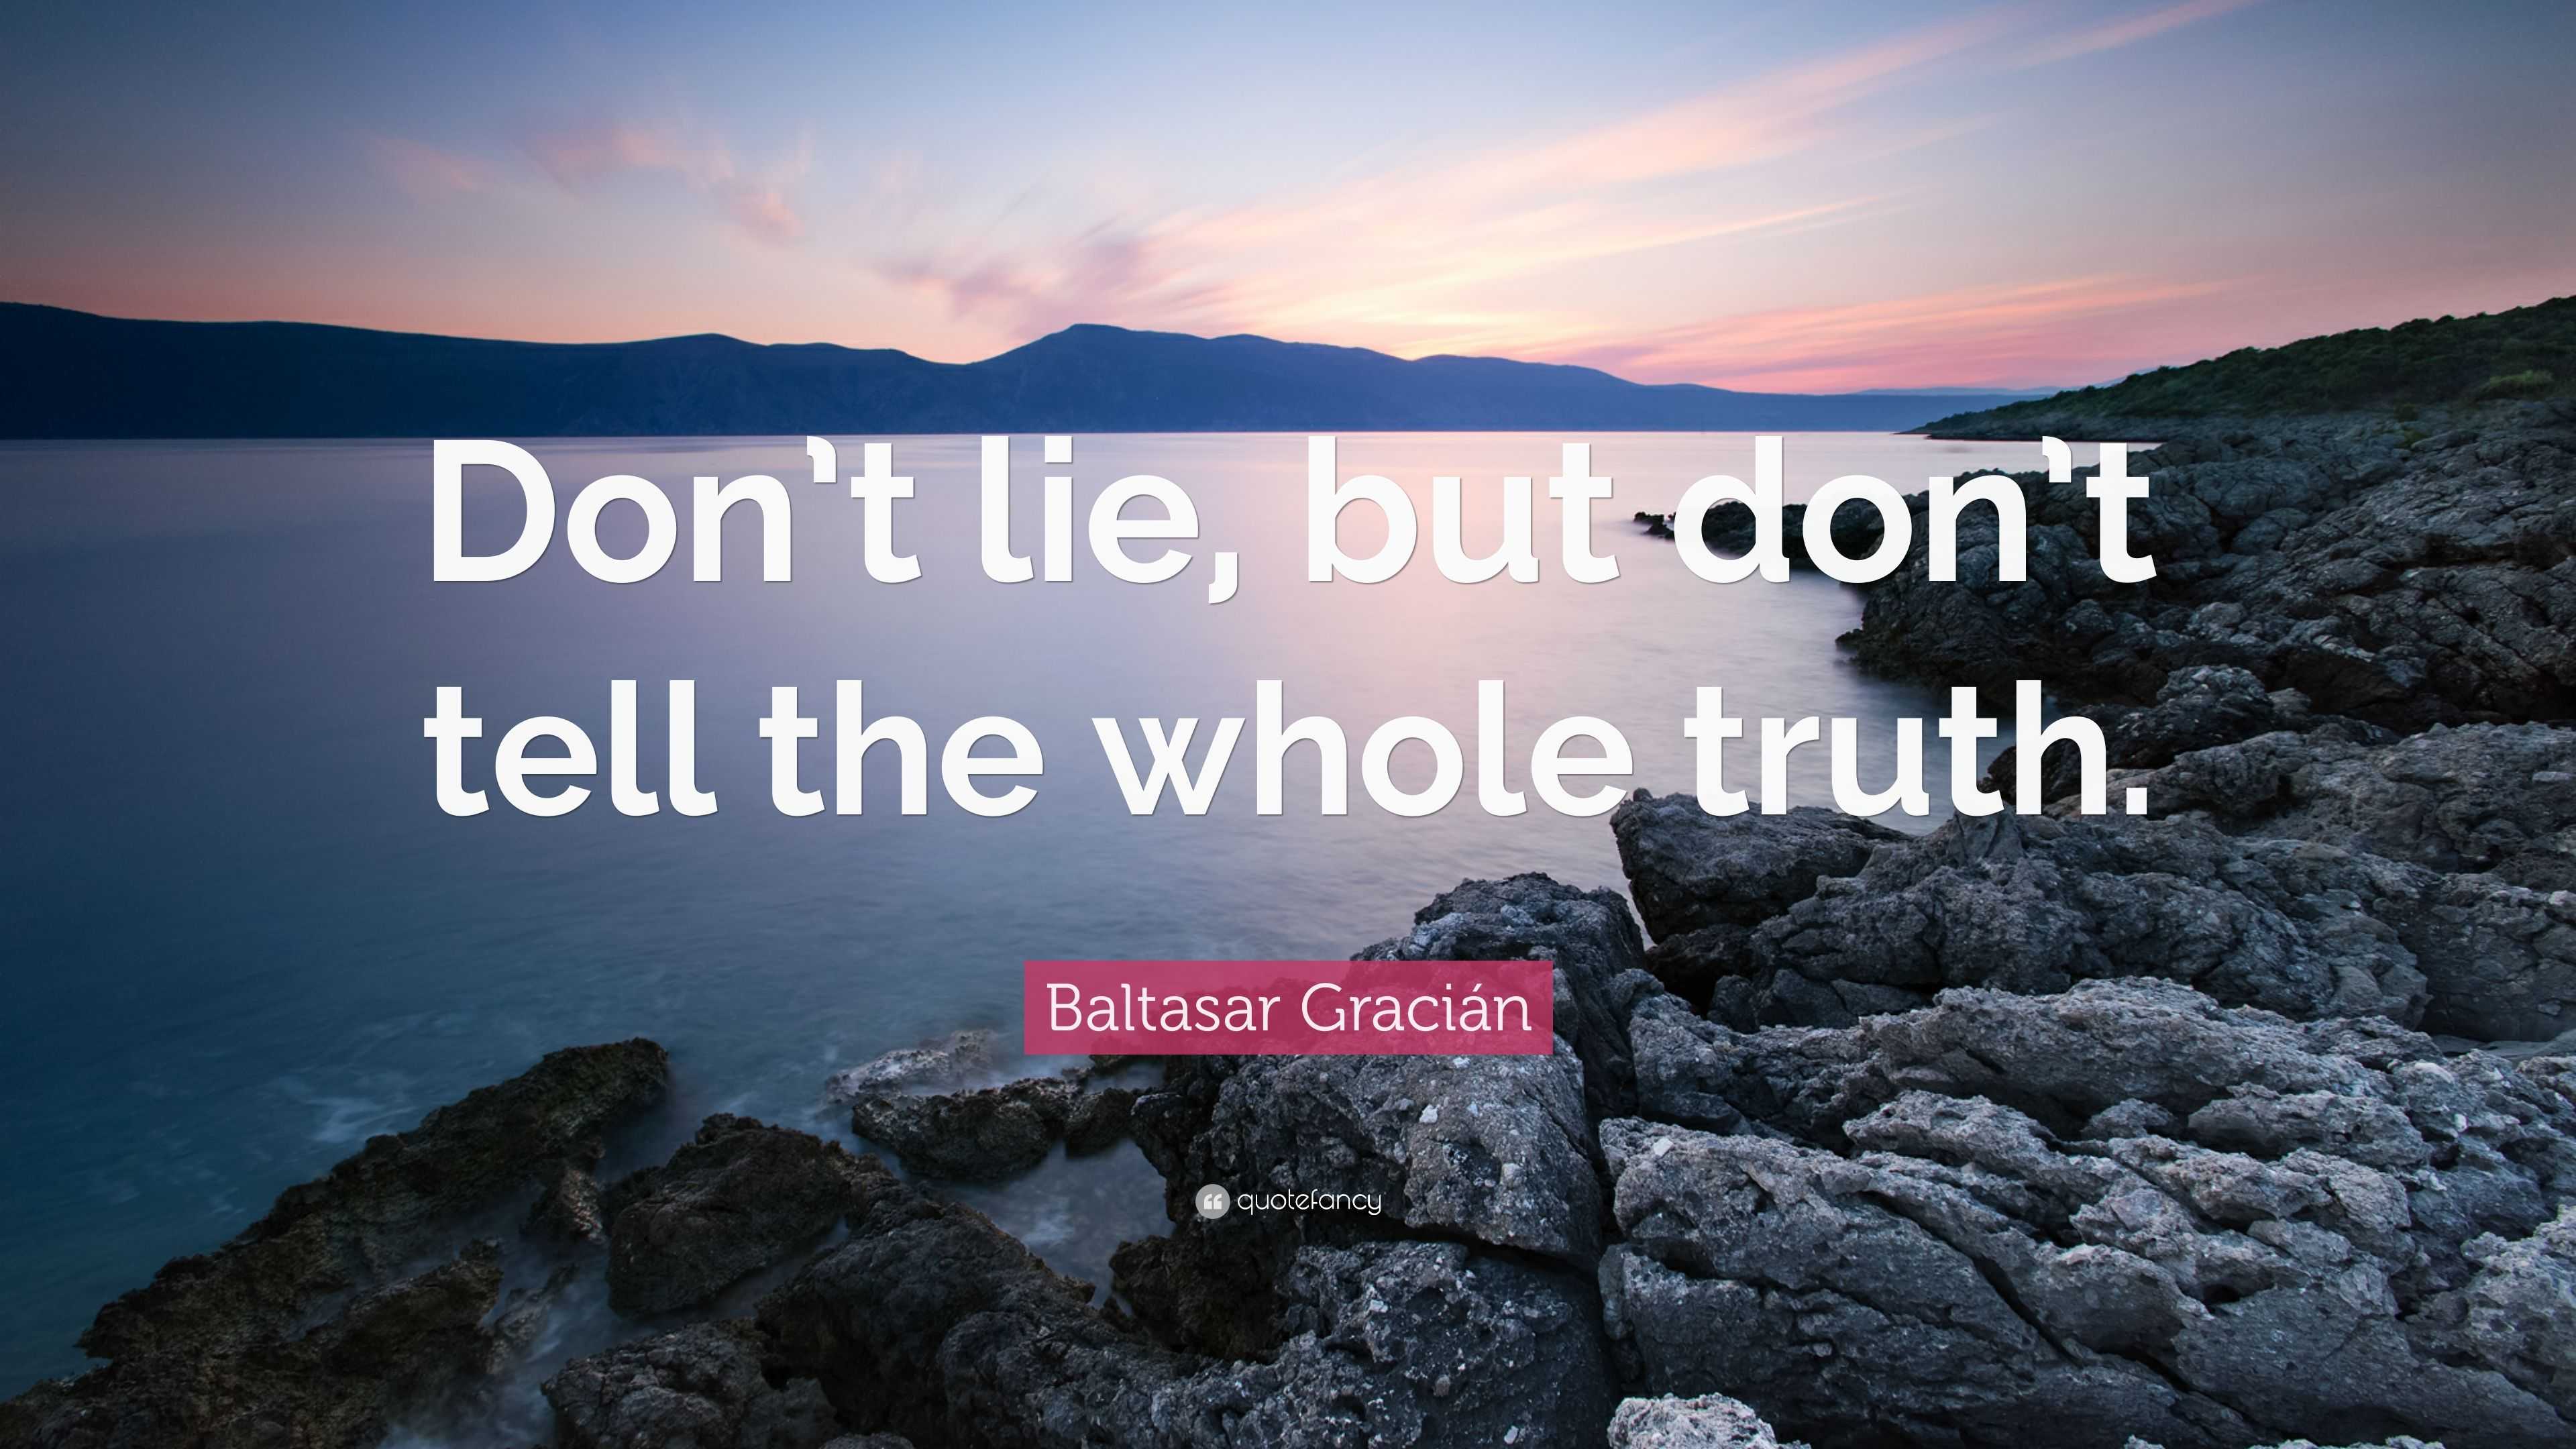 Baltasar Gracián Quote: “Don’t lie, but don’t tell the whole truth